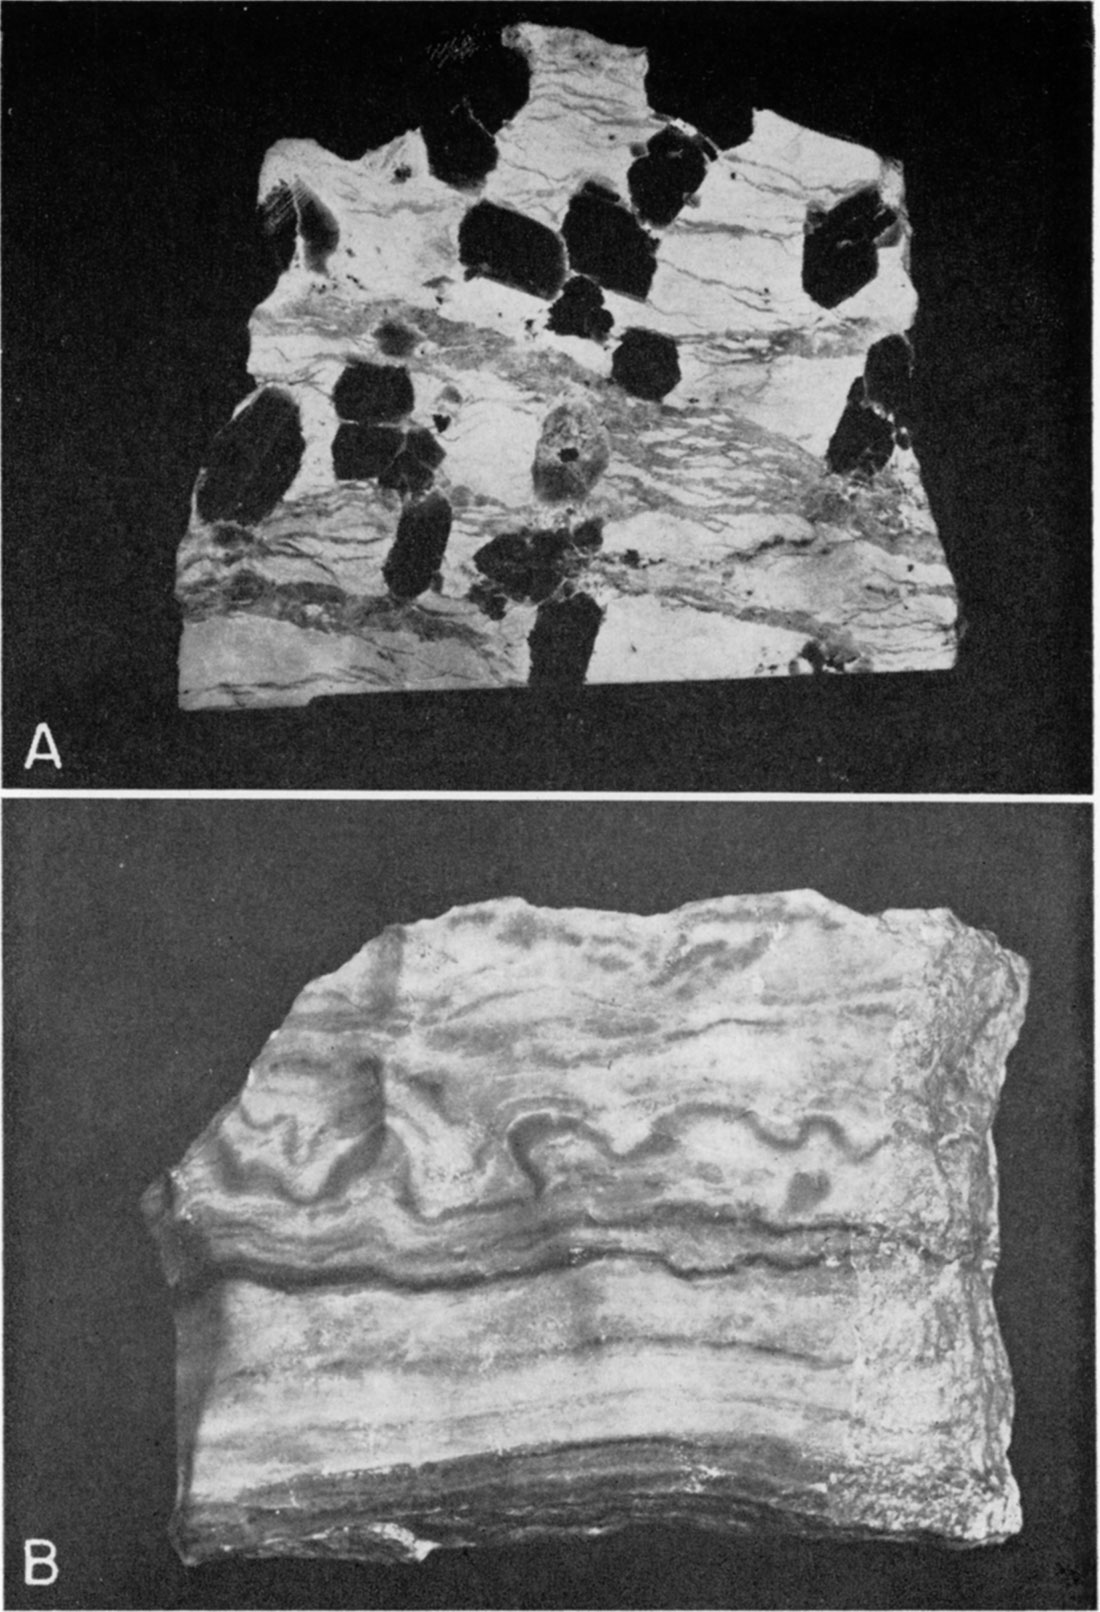 Two black and white photos; Special features in gypsum near Solomon mine.